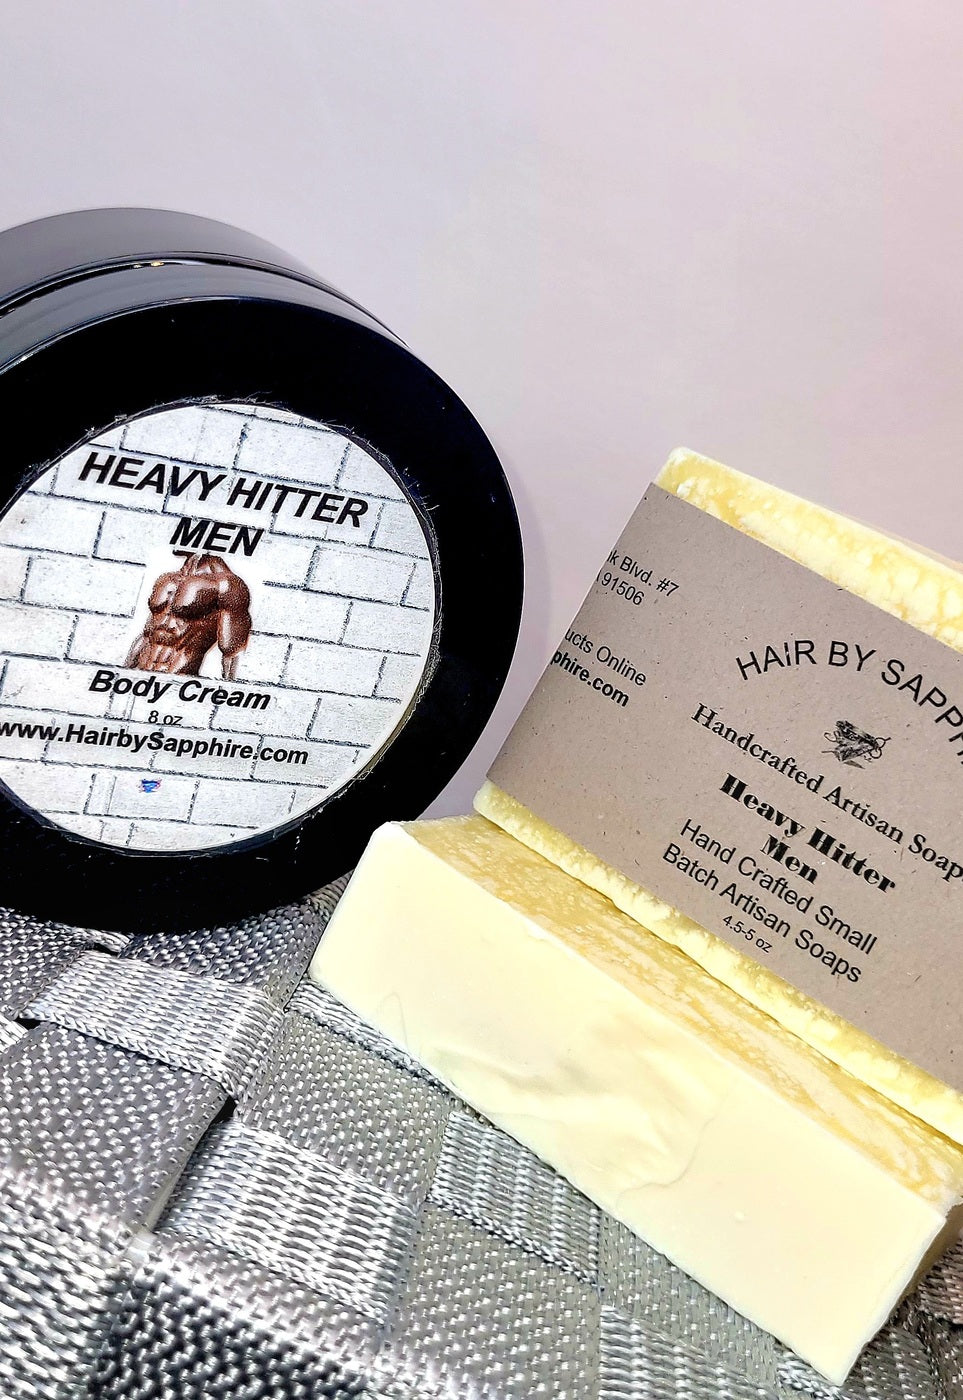 heavy hitter men bath and body gift set from hair by sapphire